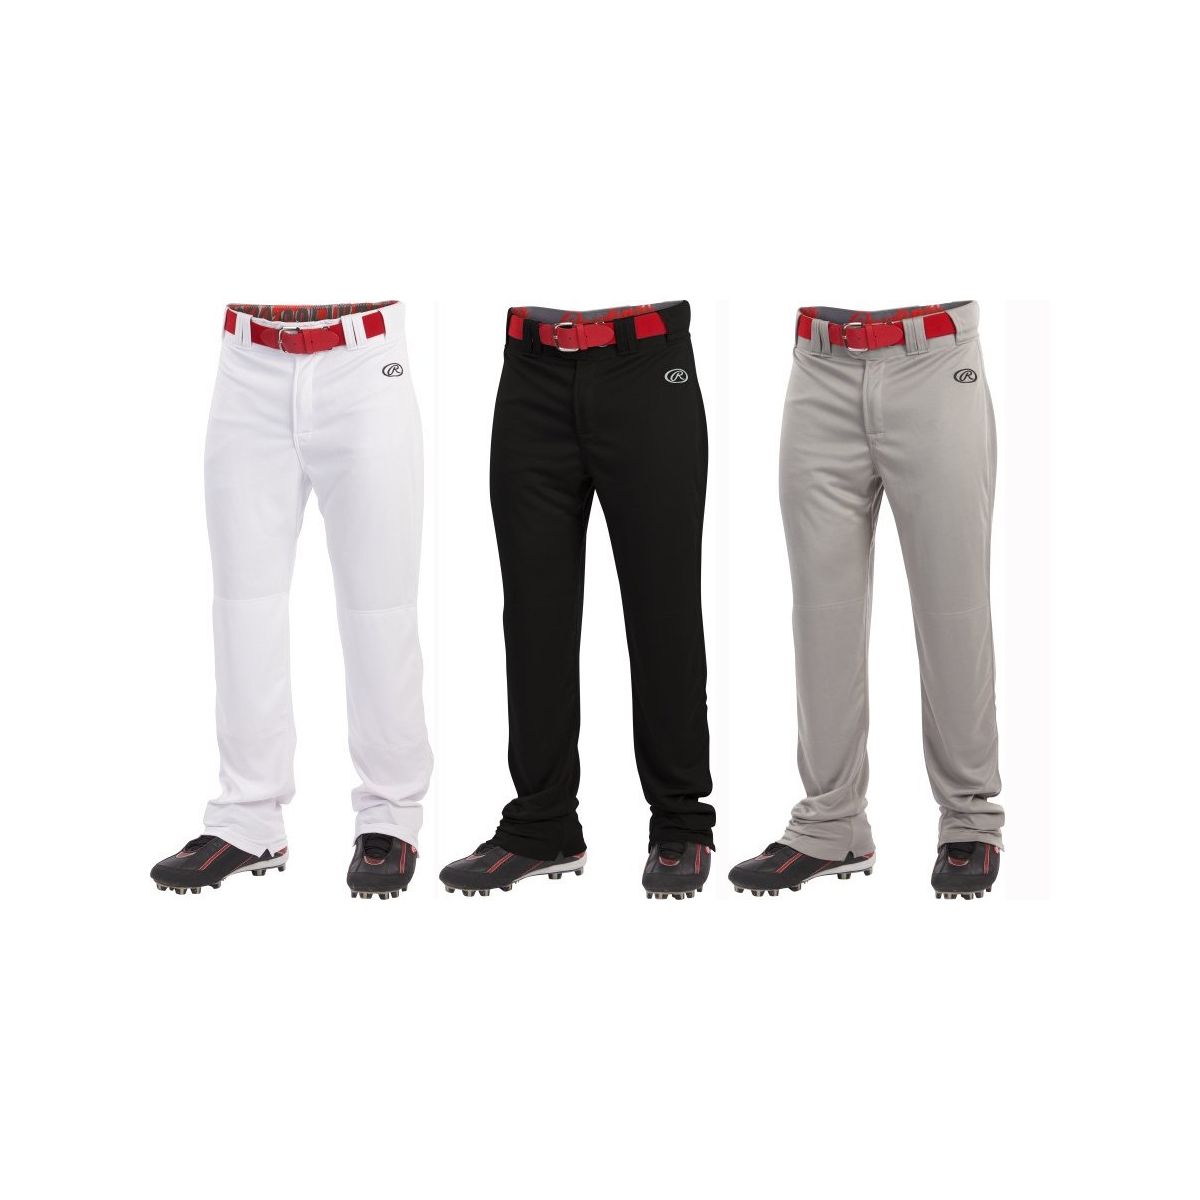 Rawlings Launch Adult Hemmed Relaxed Fit Open Bottom Baseball Pants White Grey 